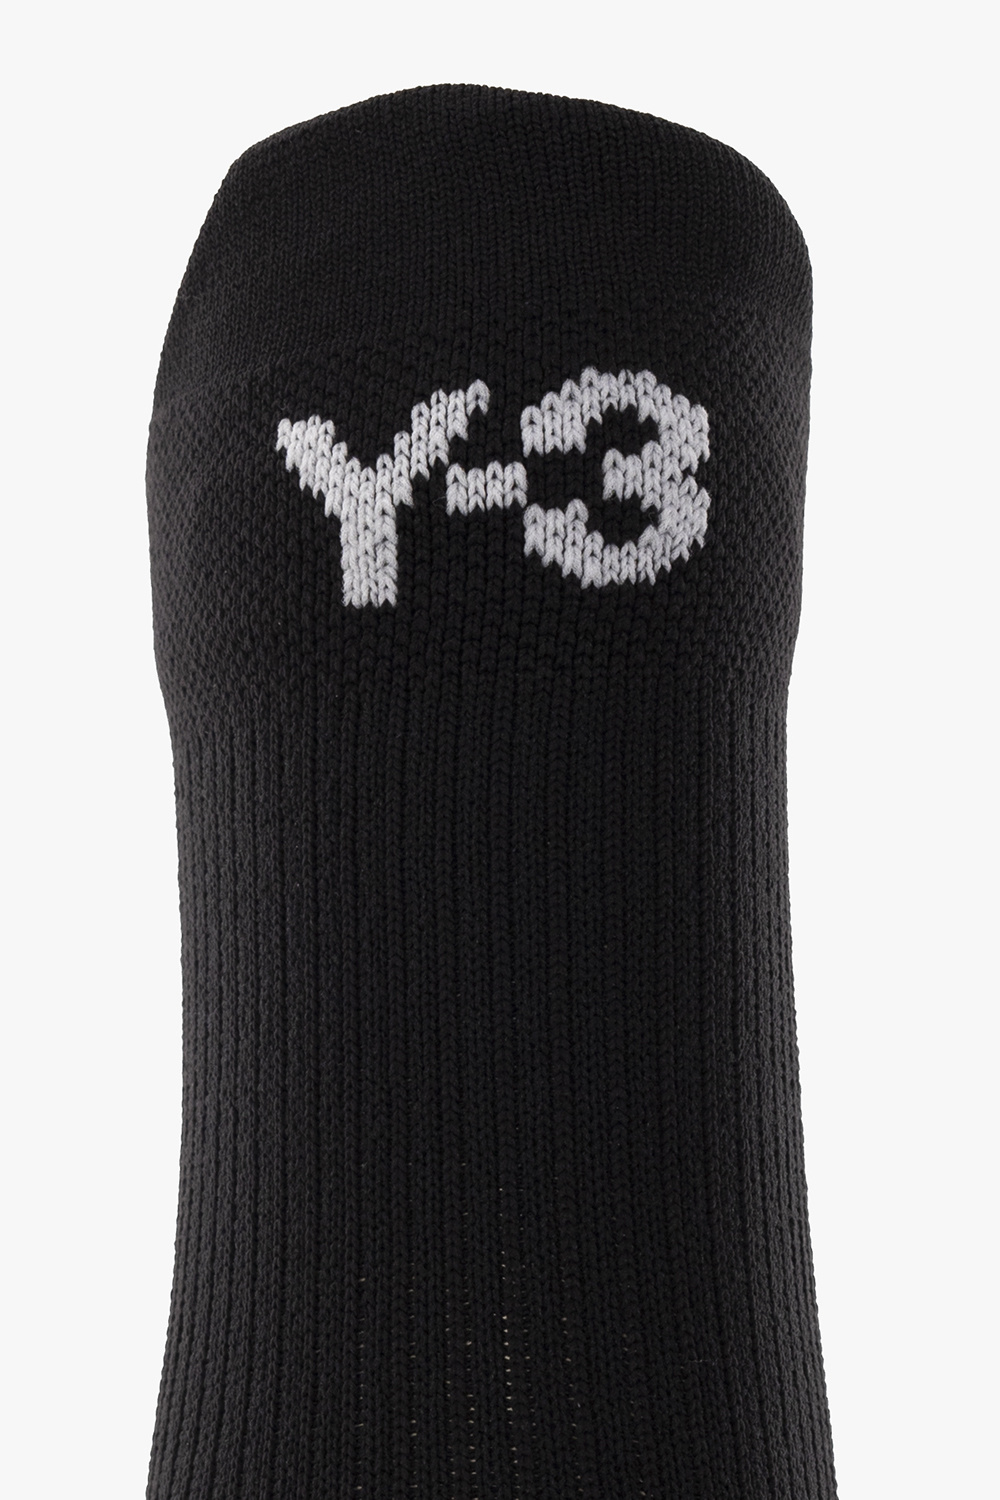 Y-3 Yohji Yamamoto If the table does not fit on your screen, you can scroll to the right